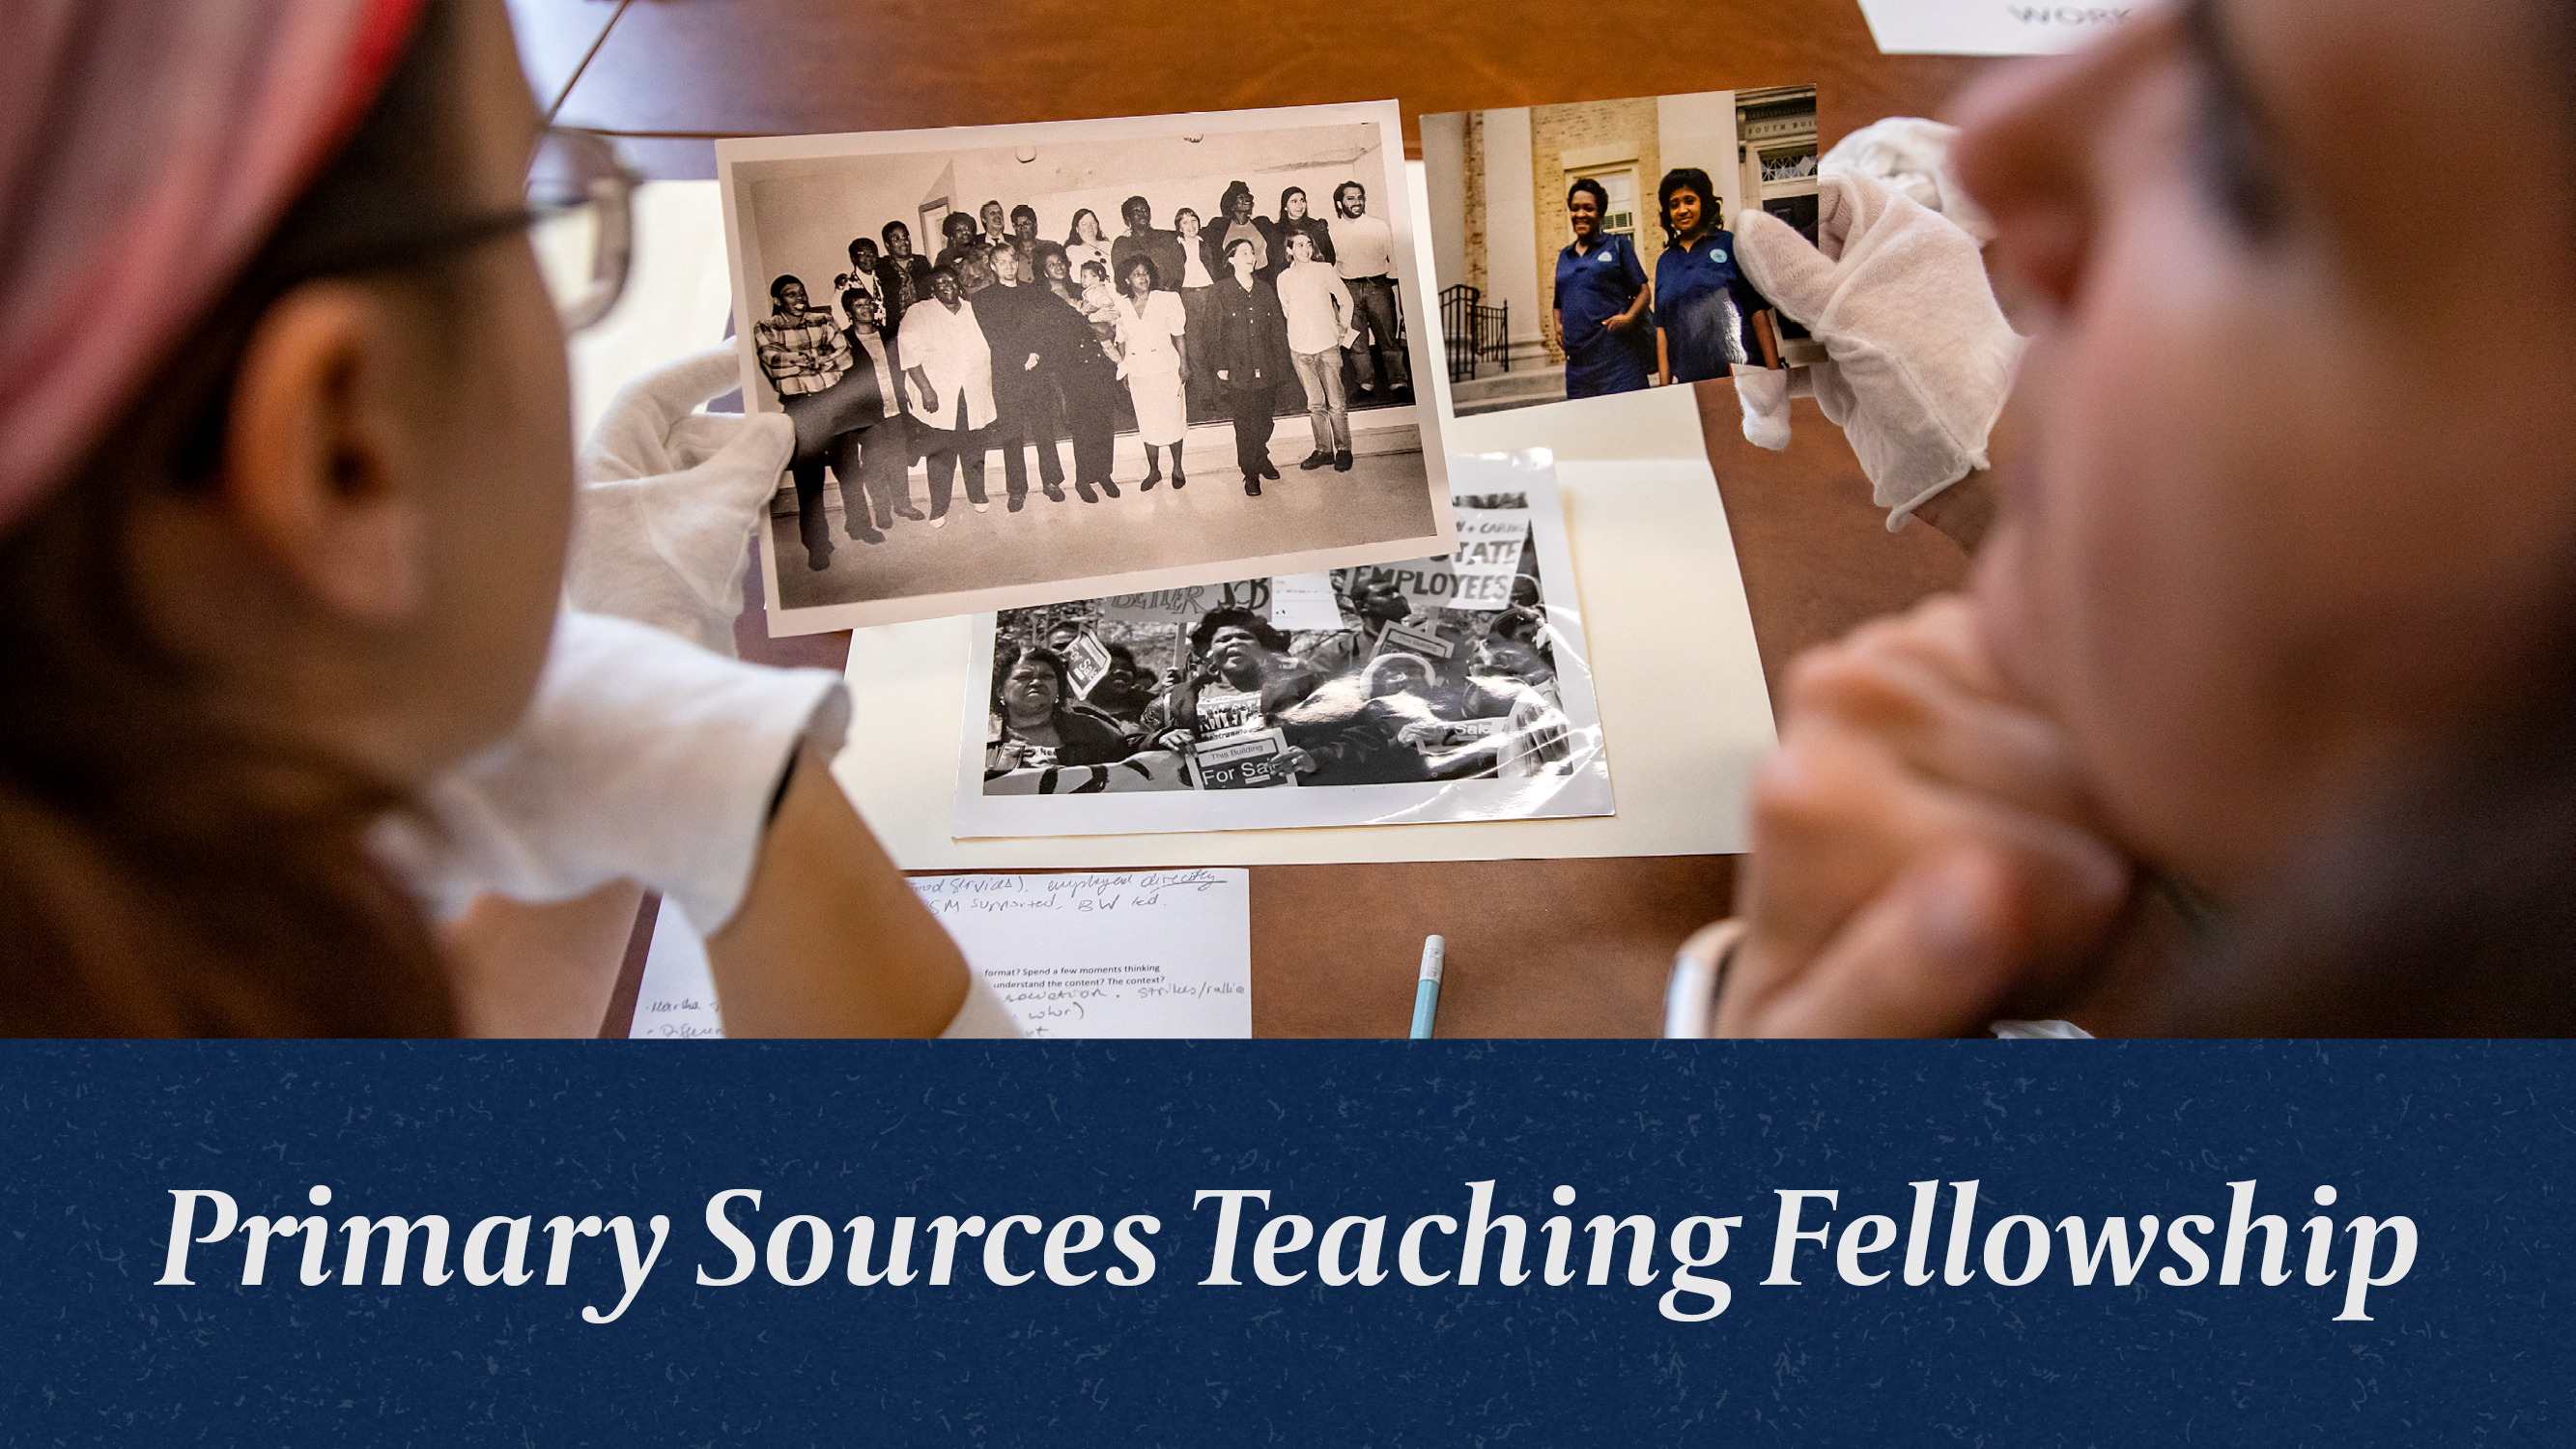 Primary Sources Teaching Fellowship. Photograph of two young white women wearing gloves and holding archival photographs from the Wilson Library Special Collections.